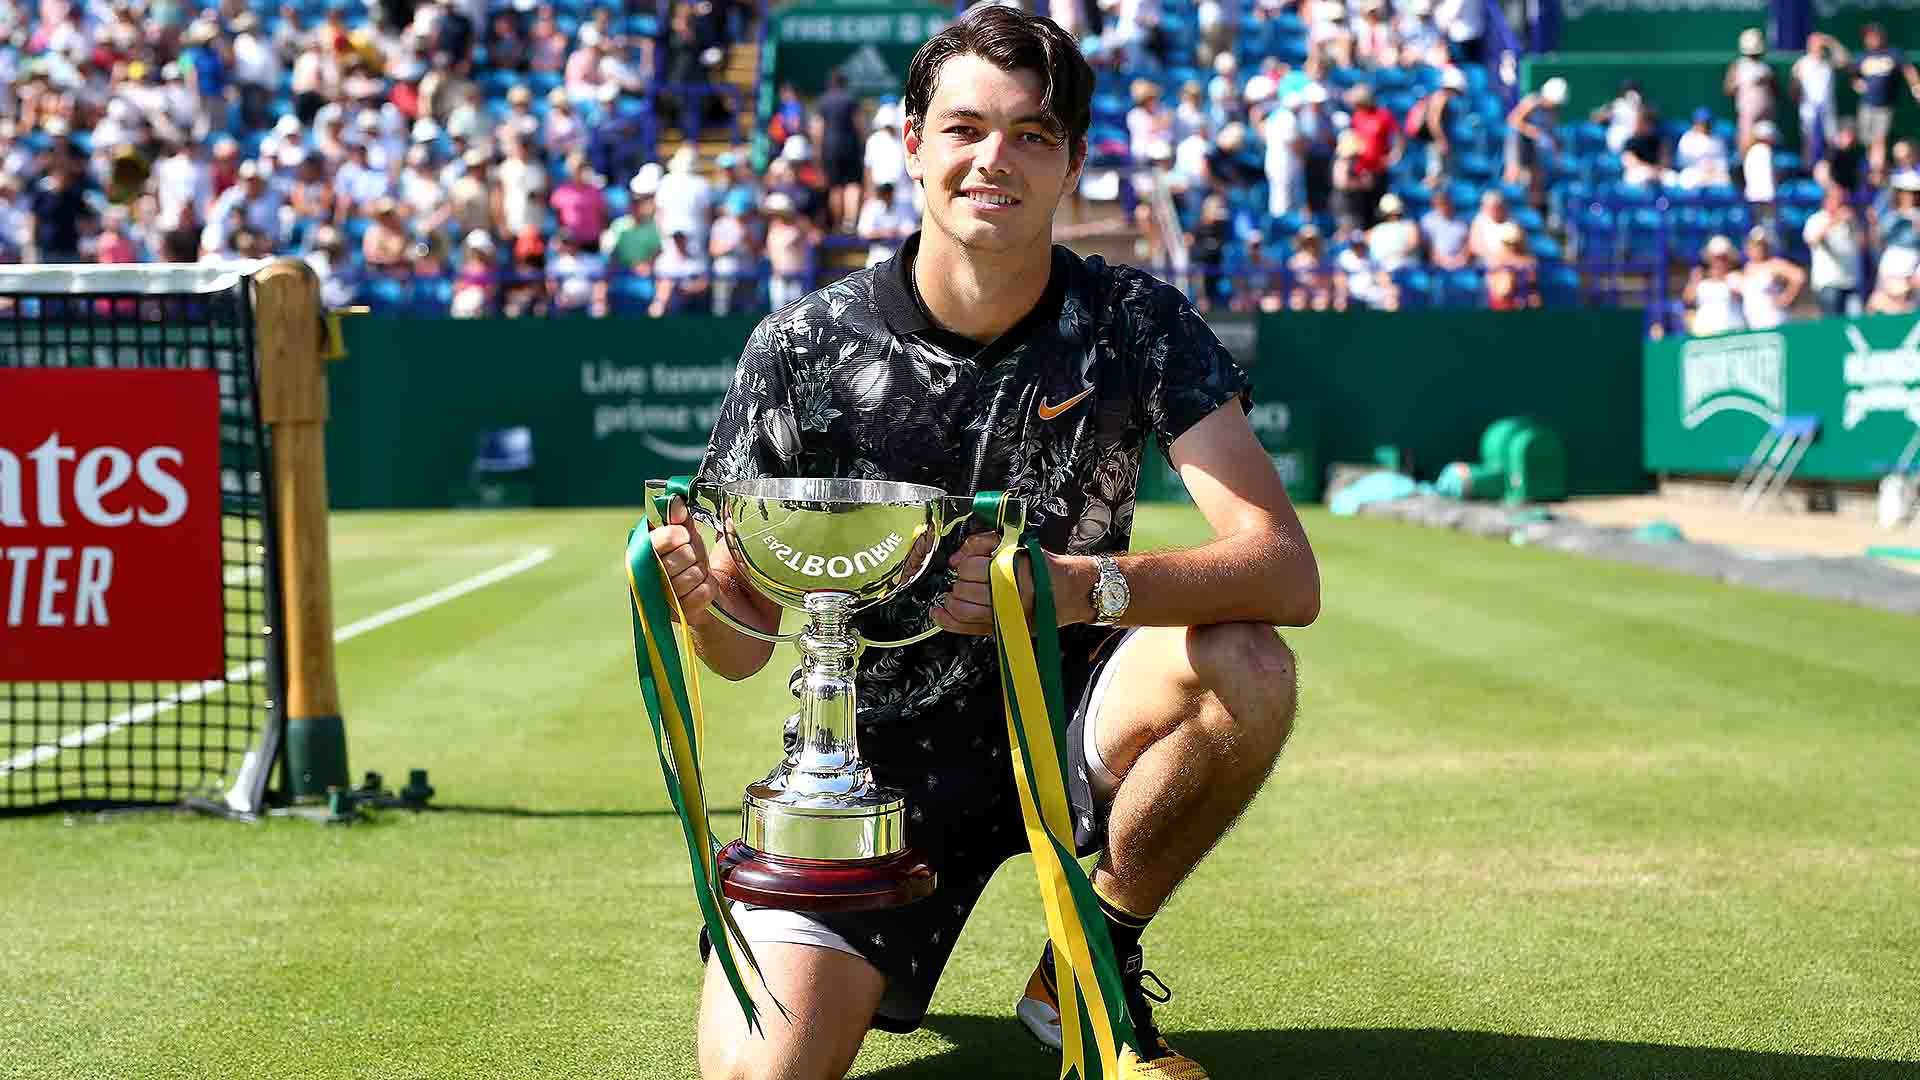 Taylor Fritz Holding His Trophy